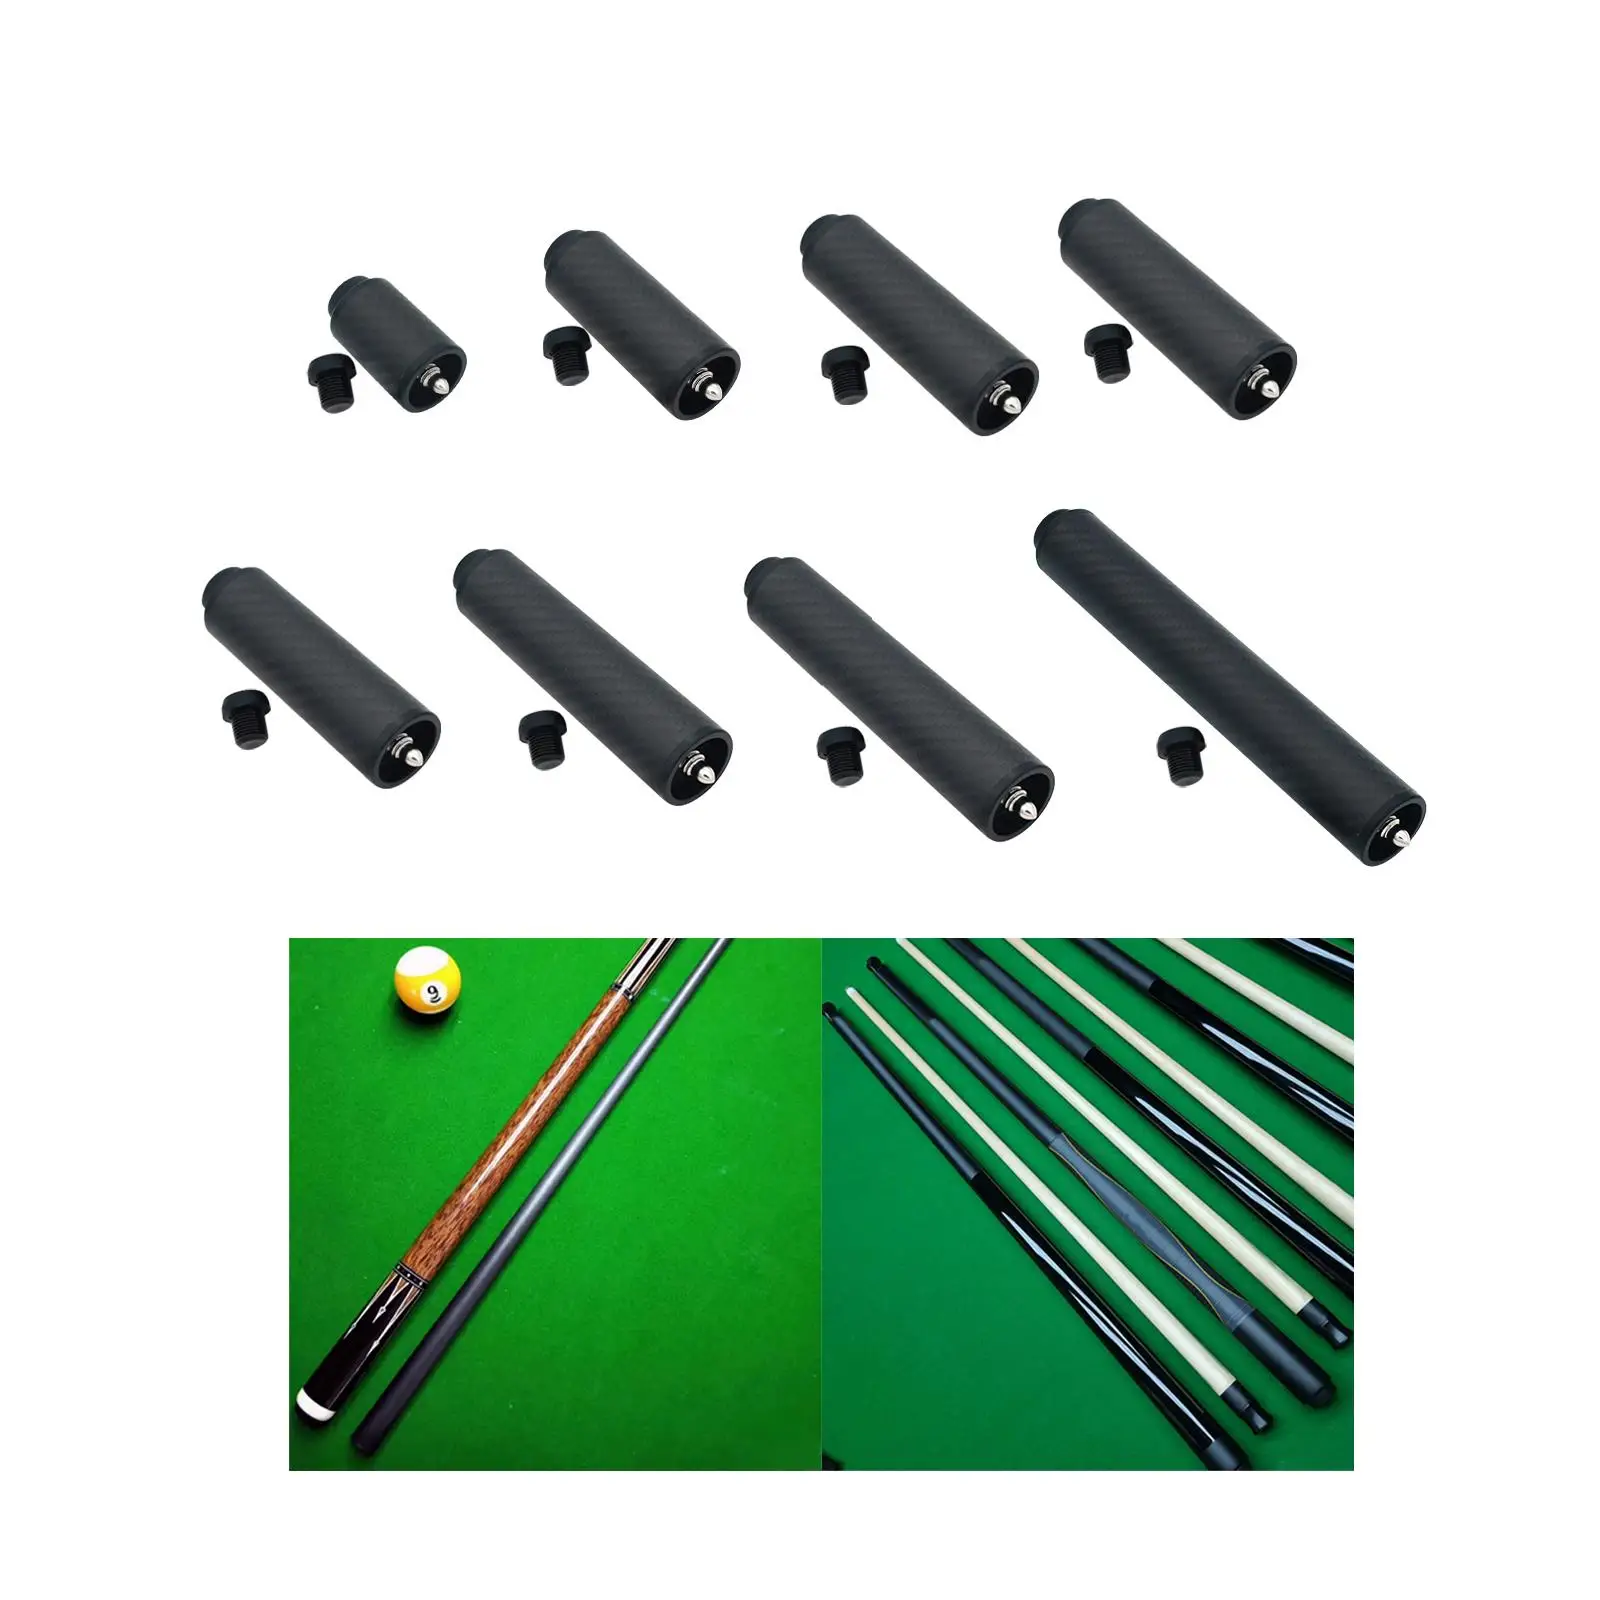 Billiards Pool Cue Extension Compact Cue End Lengthener Lightweight Cue Stick Extender Snooker Cue Long Extension for Enthusiast